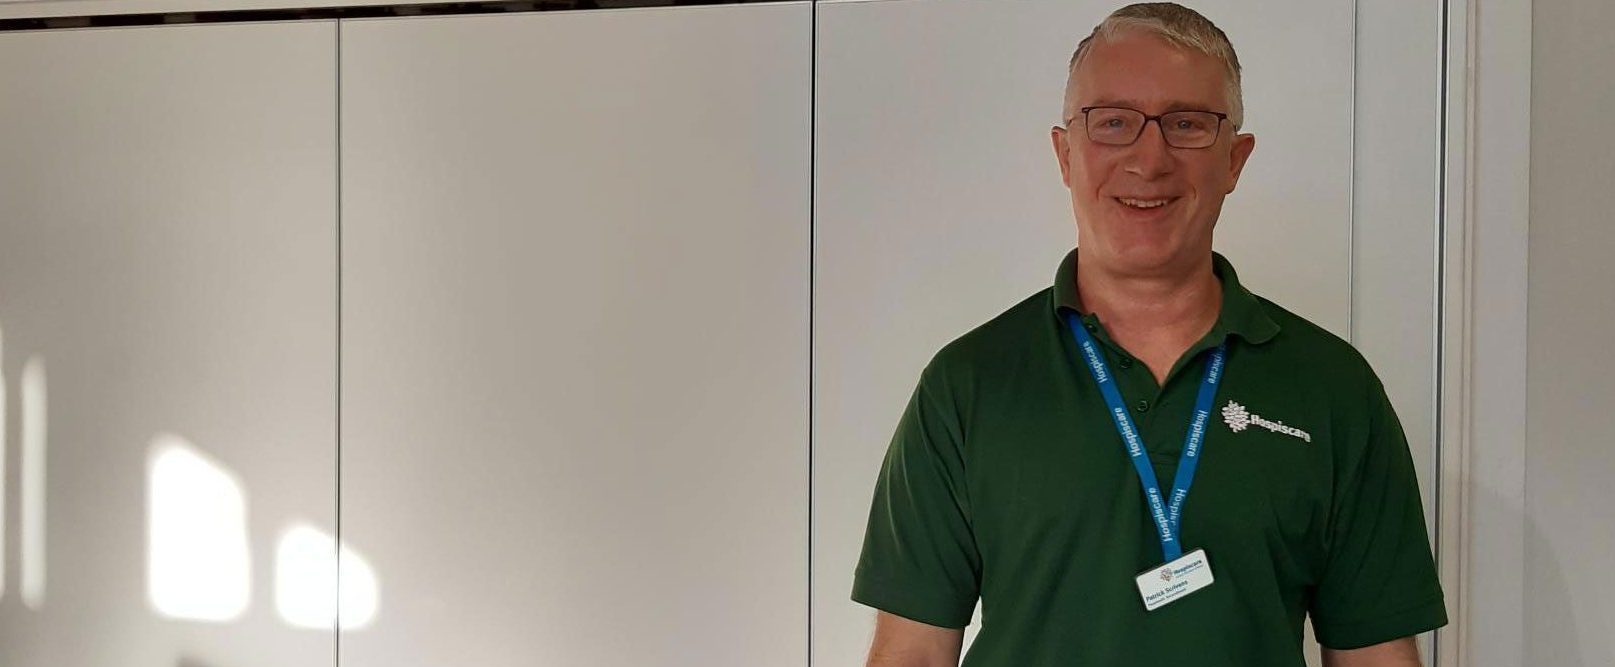 Meet Patch, Hospiscare’s first paramedic